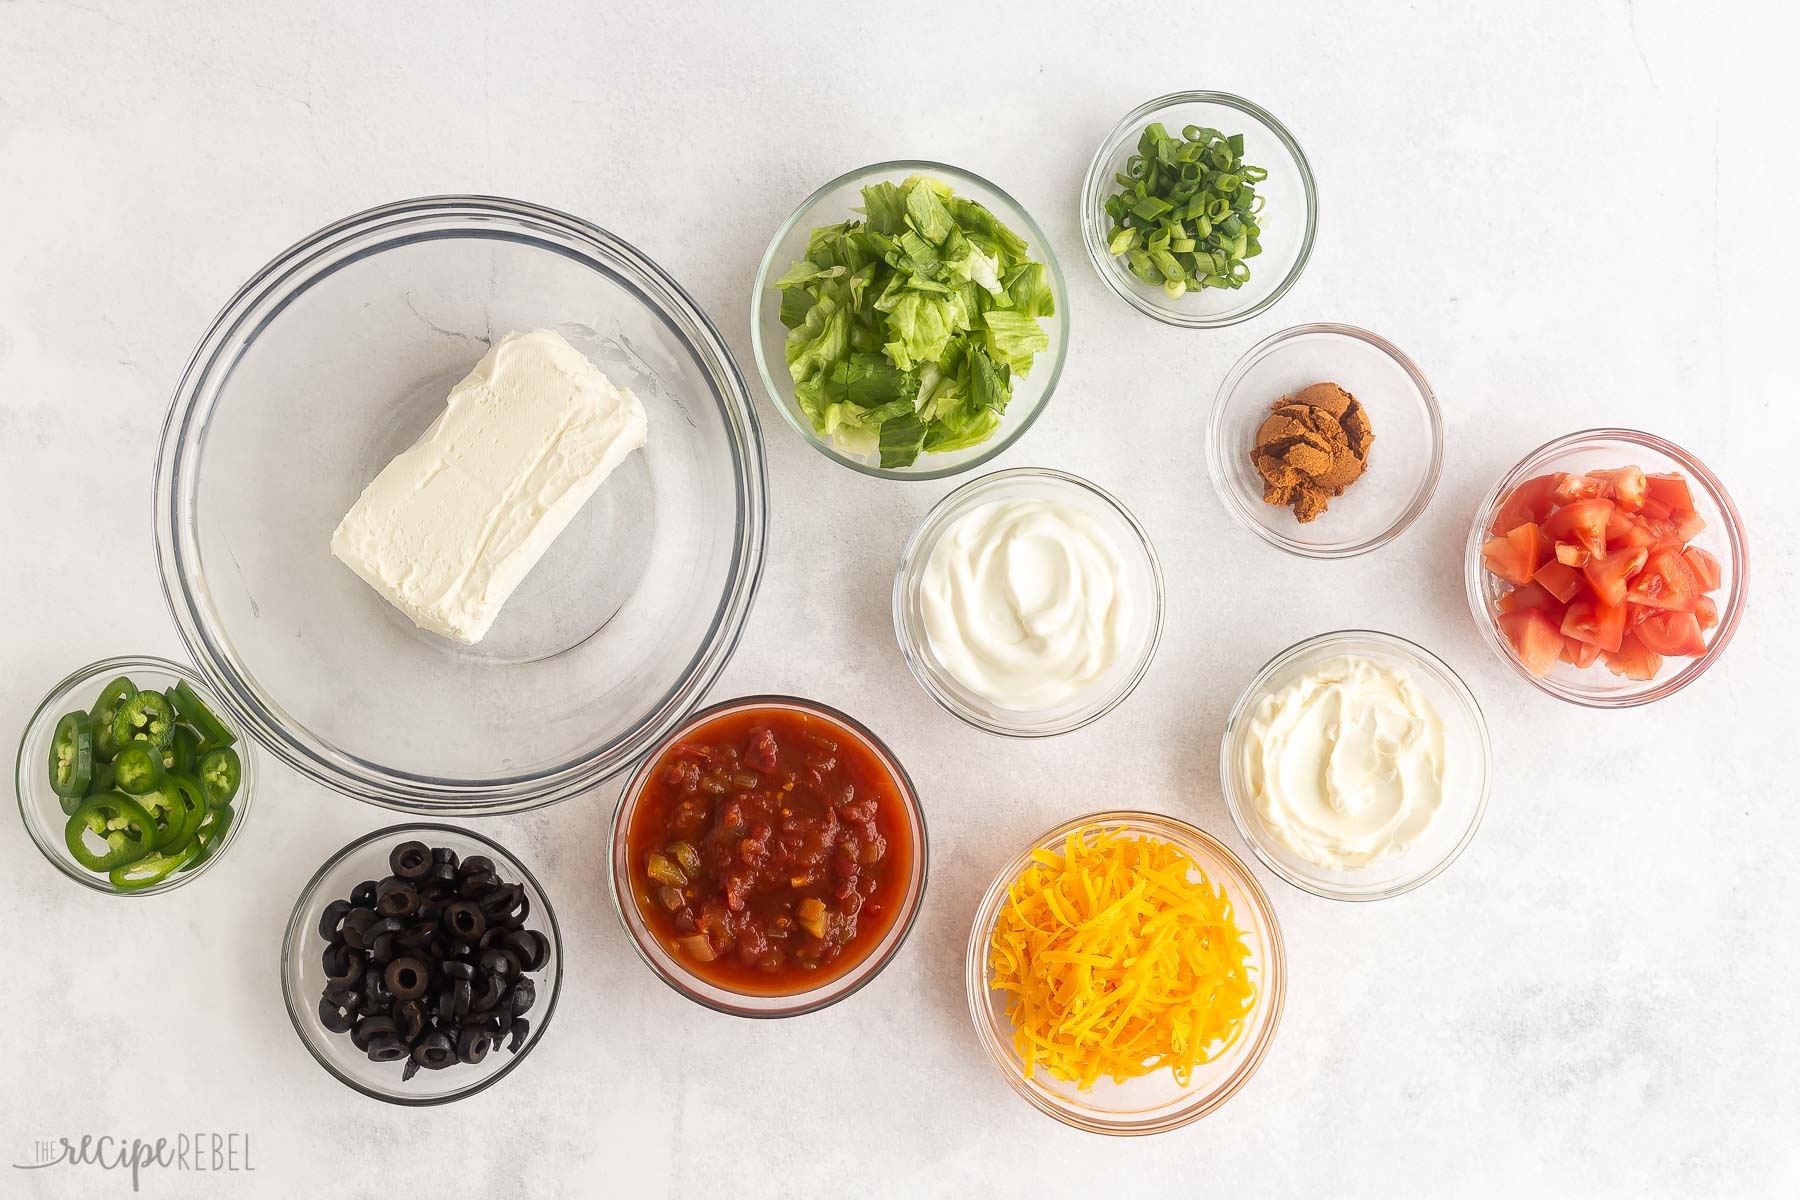 ingredients needed for taco dip.